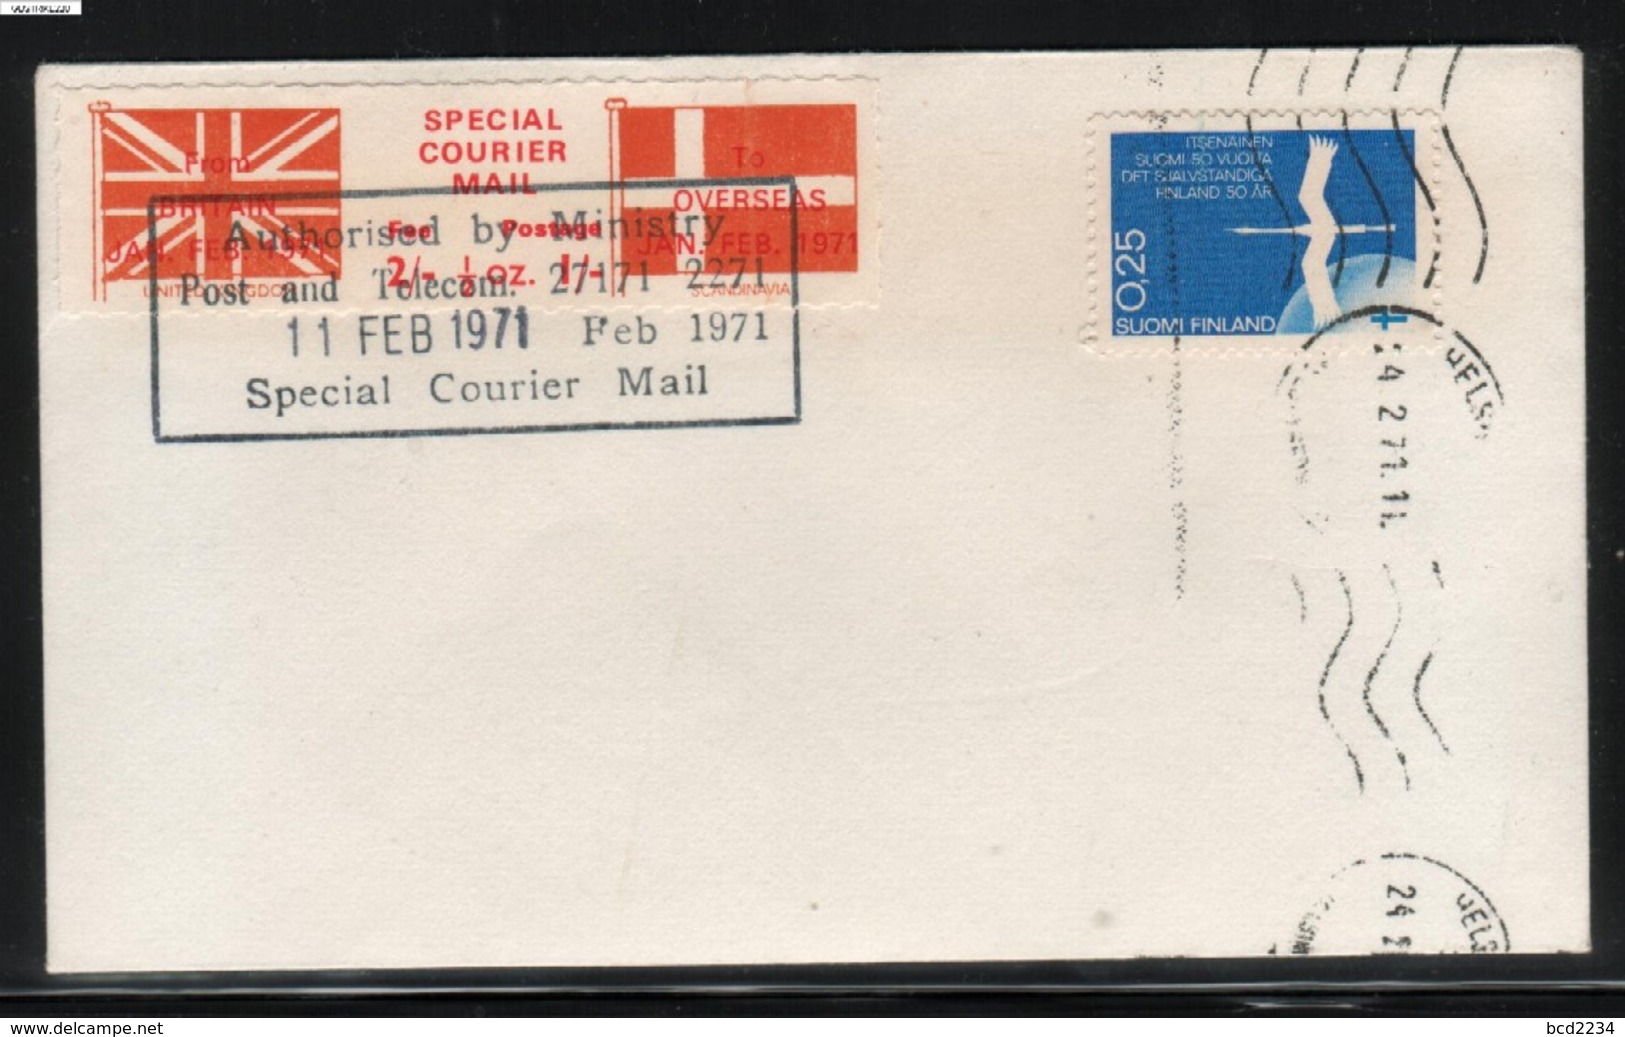 GREAT BRITAIN GB 1971 POSTAL STRIKE MAIL SPECIAL COURIER MAIL 1ST ISSUE PRE-DECIMAL COVER HELSINKI FINLAND 11 FEBRUARY - Errors, Freaks & Oddities (EFO)